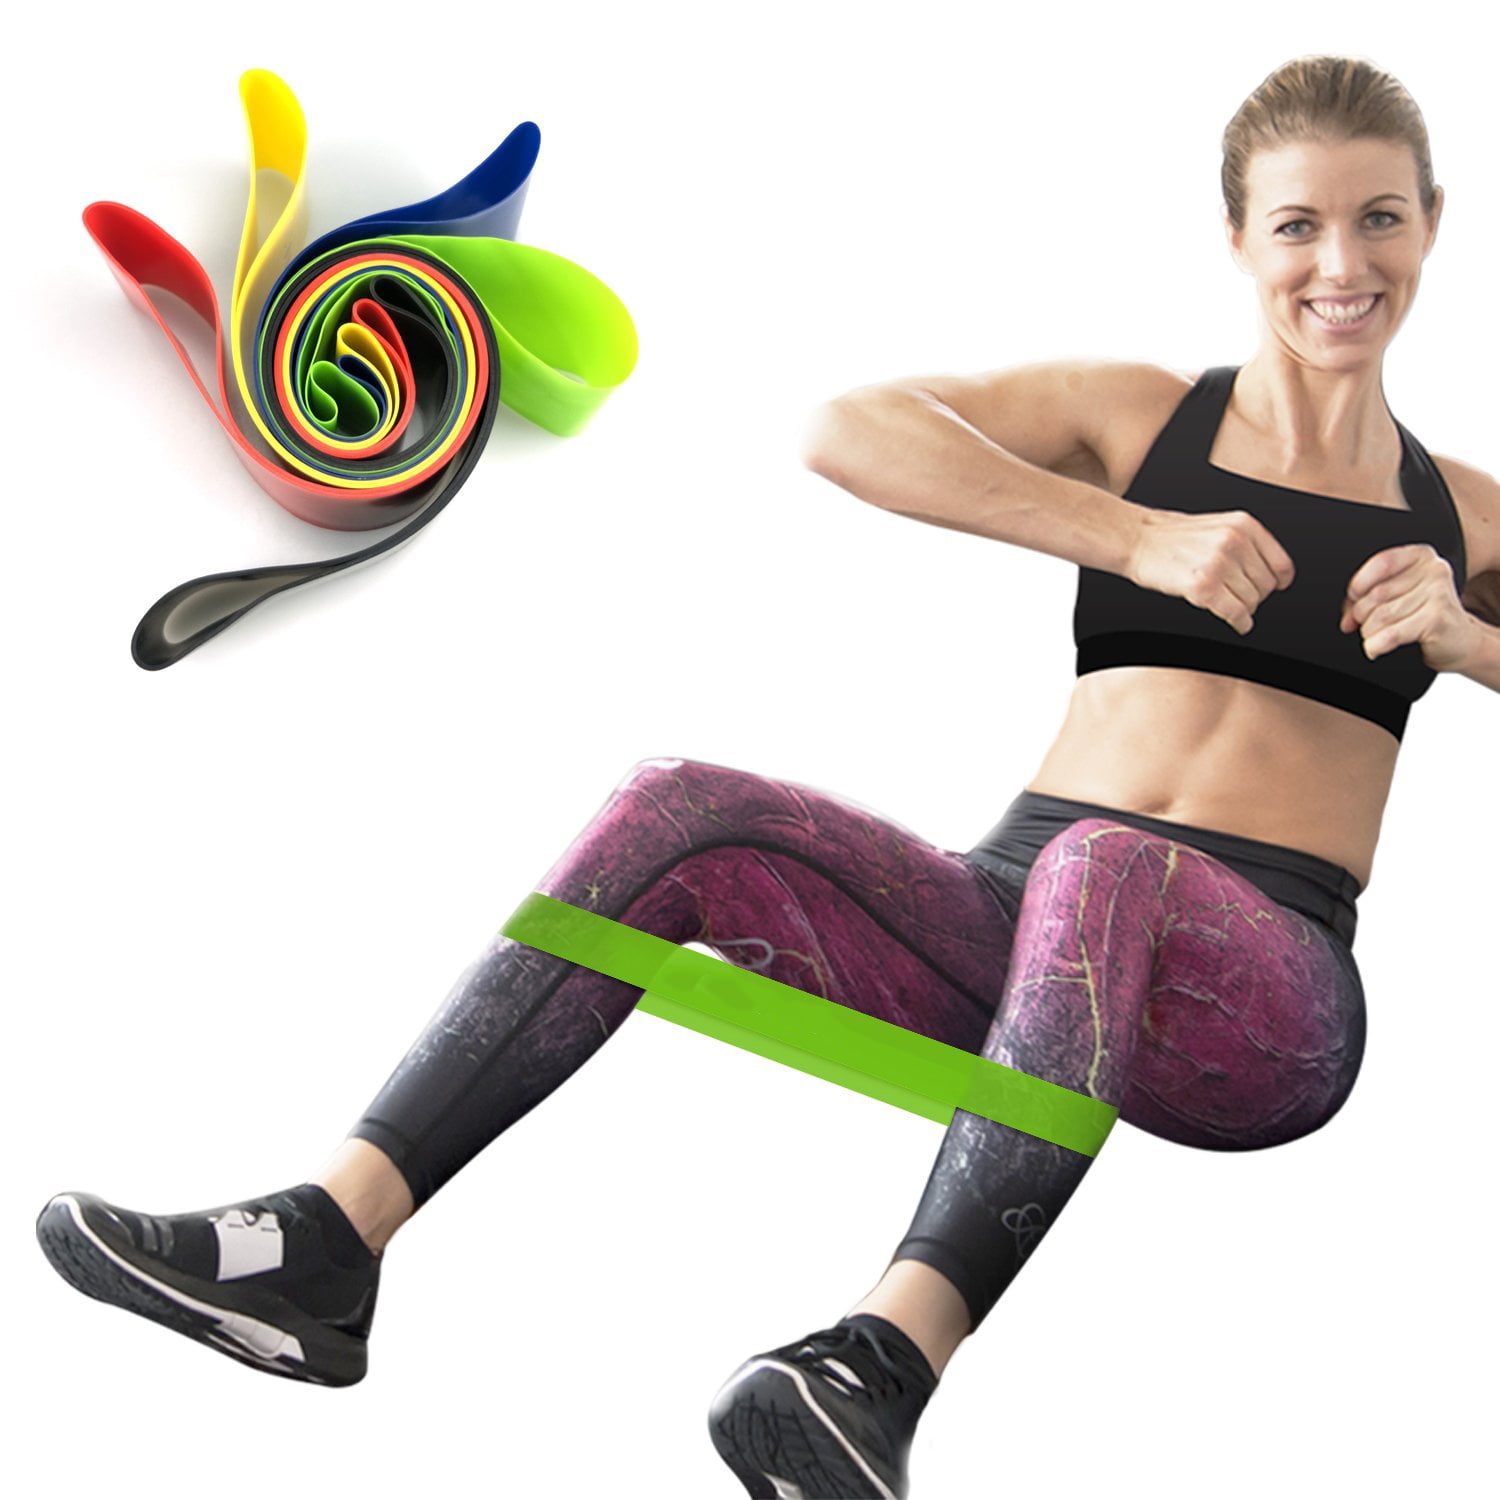 INMAKER Resistance Bands for Women and Men Exercise Bands for Legs and Glutes 